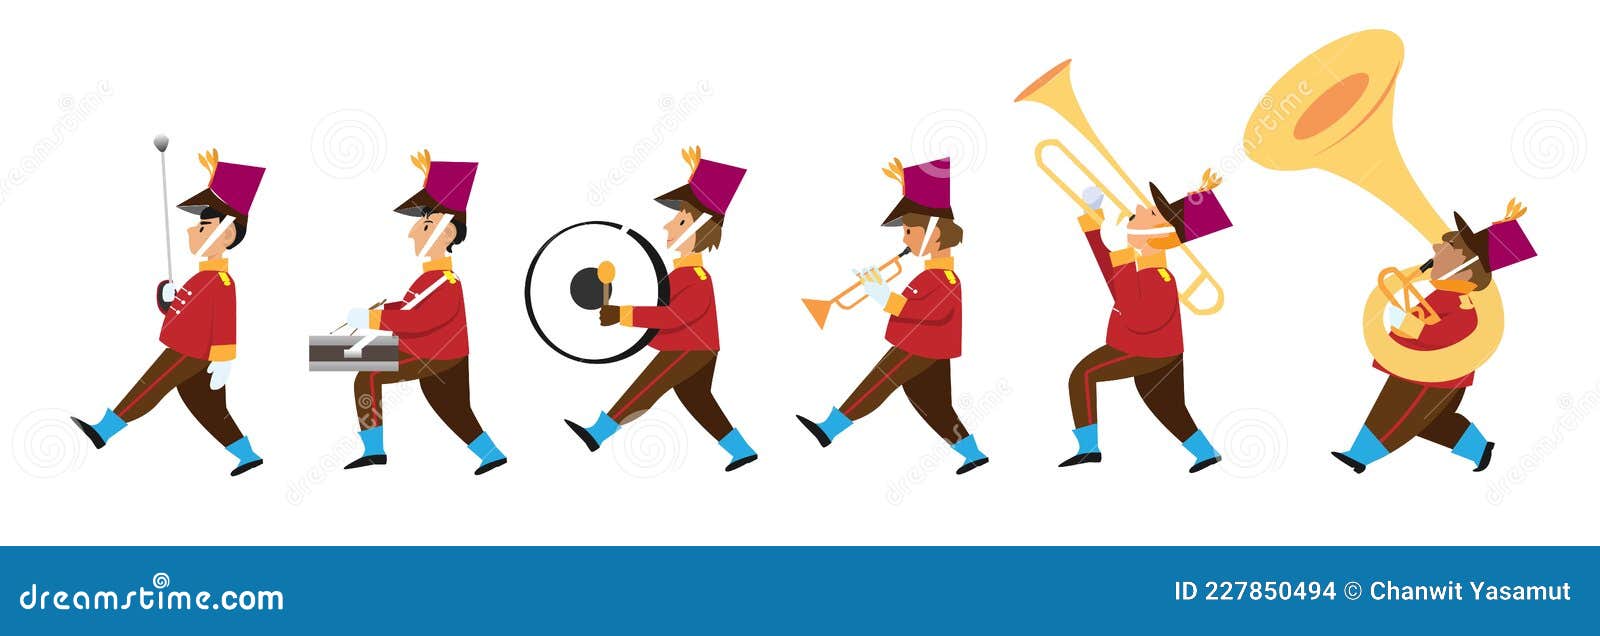 cute children playing musical instruments in the marching band parade. flat style cartoon  